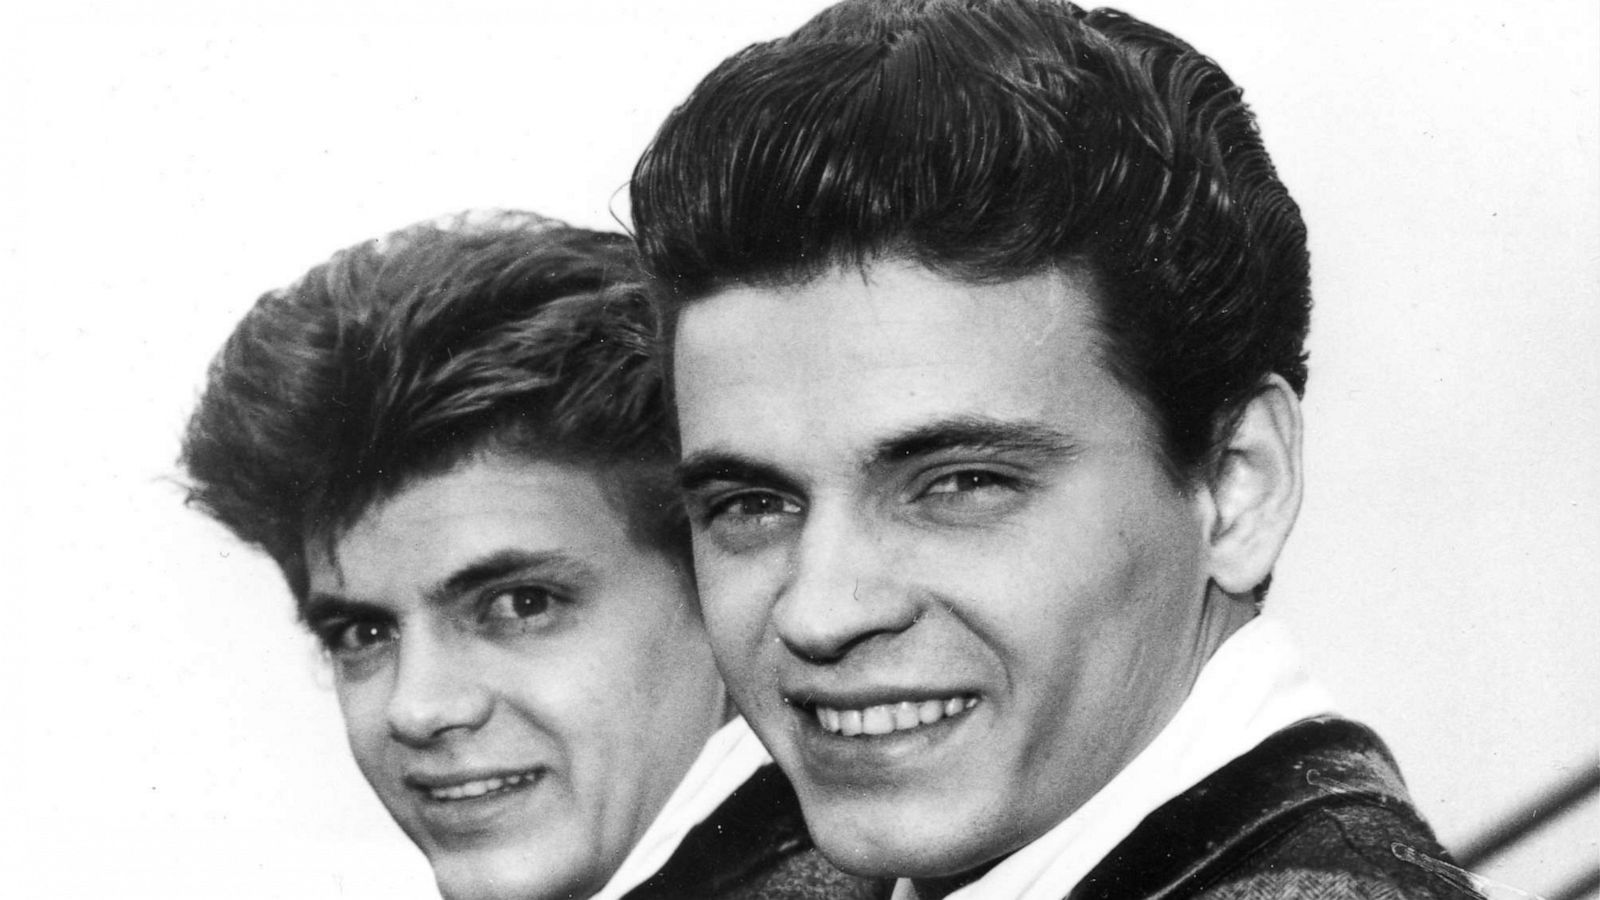 PHOTO: Phil, left, and Don of the Everly Brothers arrive at London Airport from New York to begin their European tour, April 1, 1960.